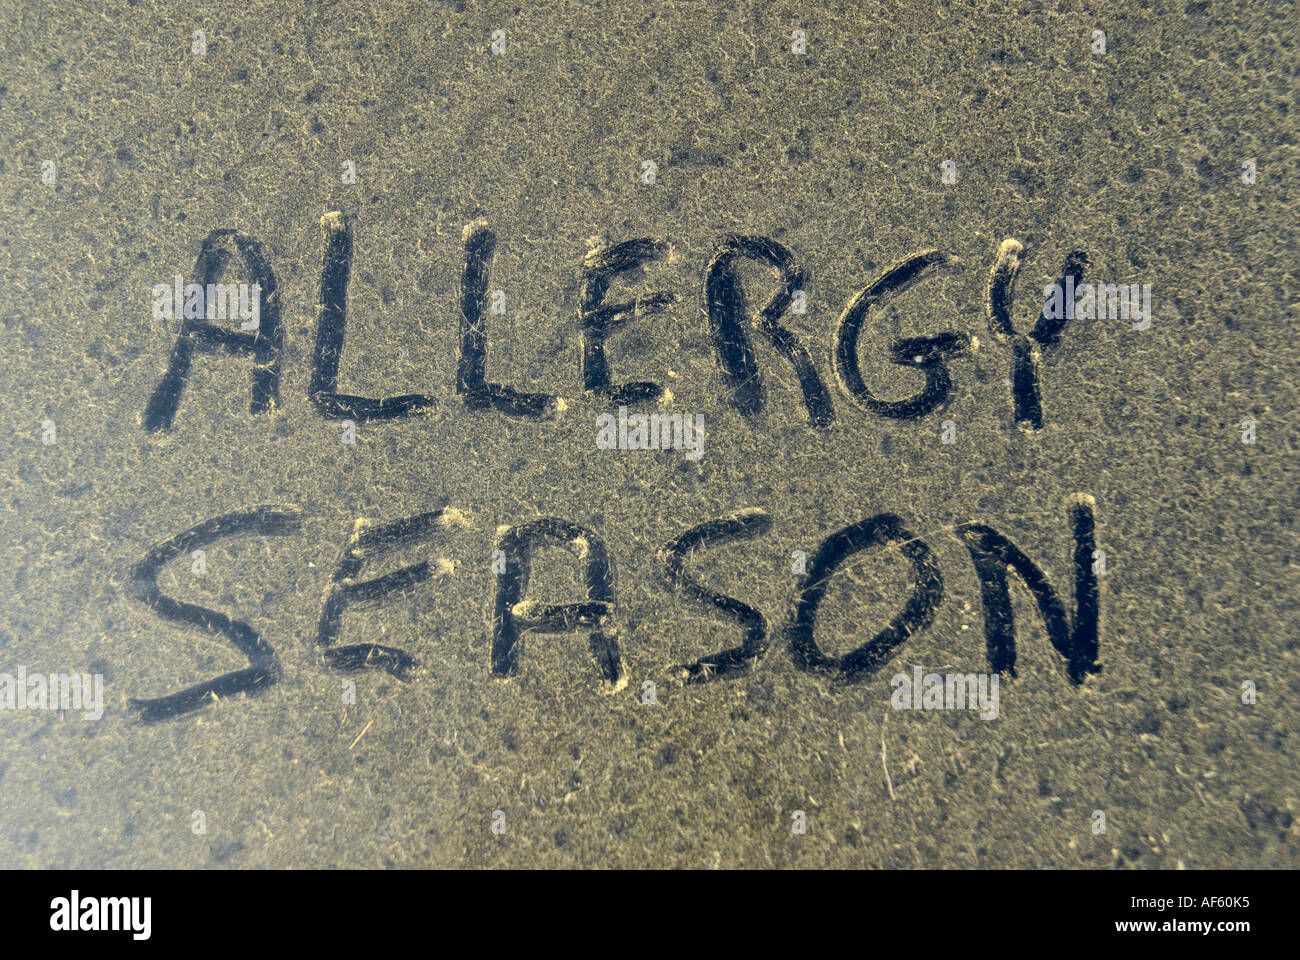 Allergy season words drawn in pollen accumulated on hood of car Stock Photo